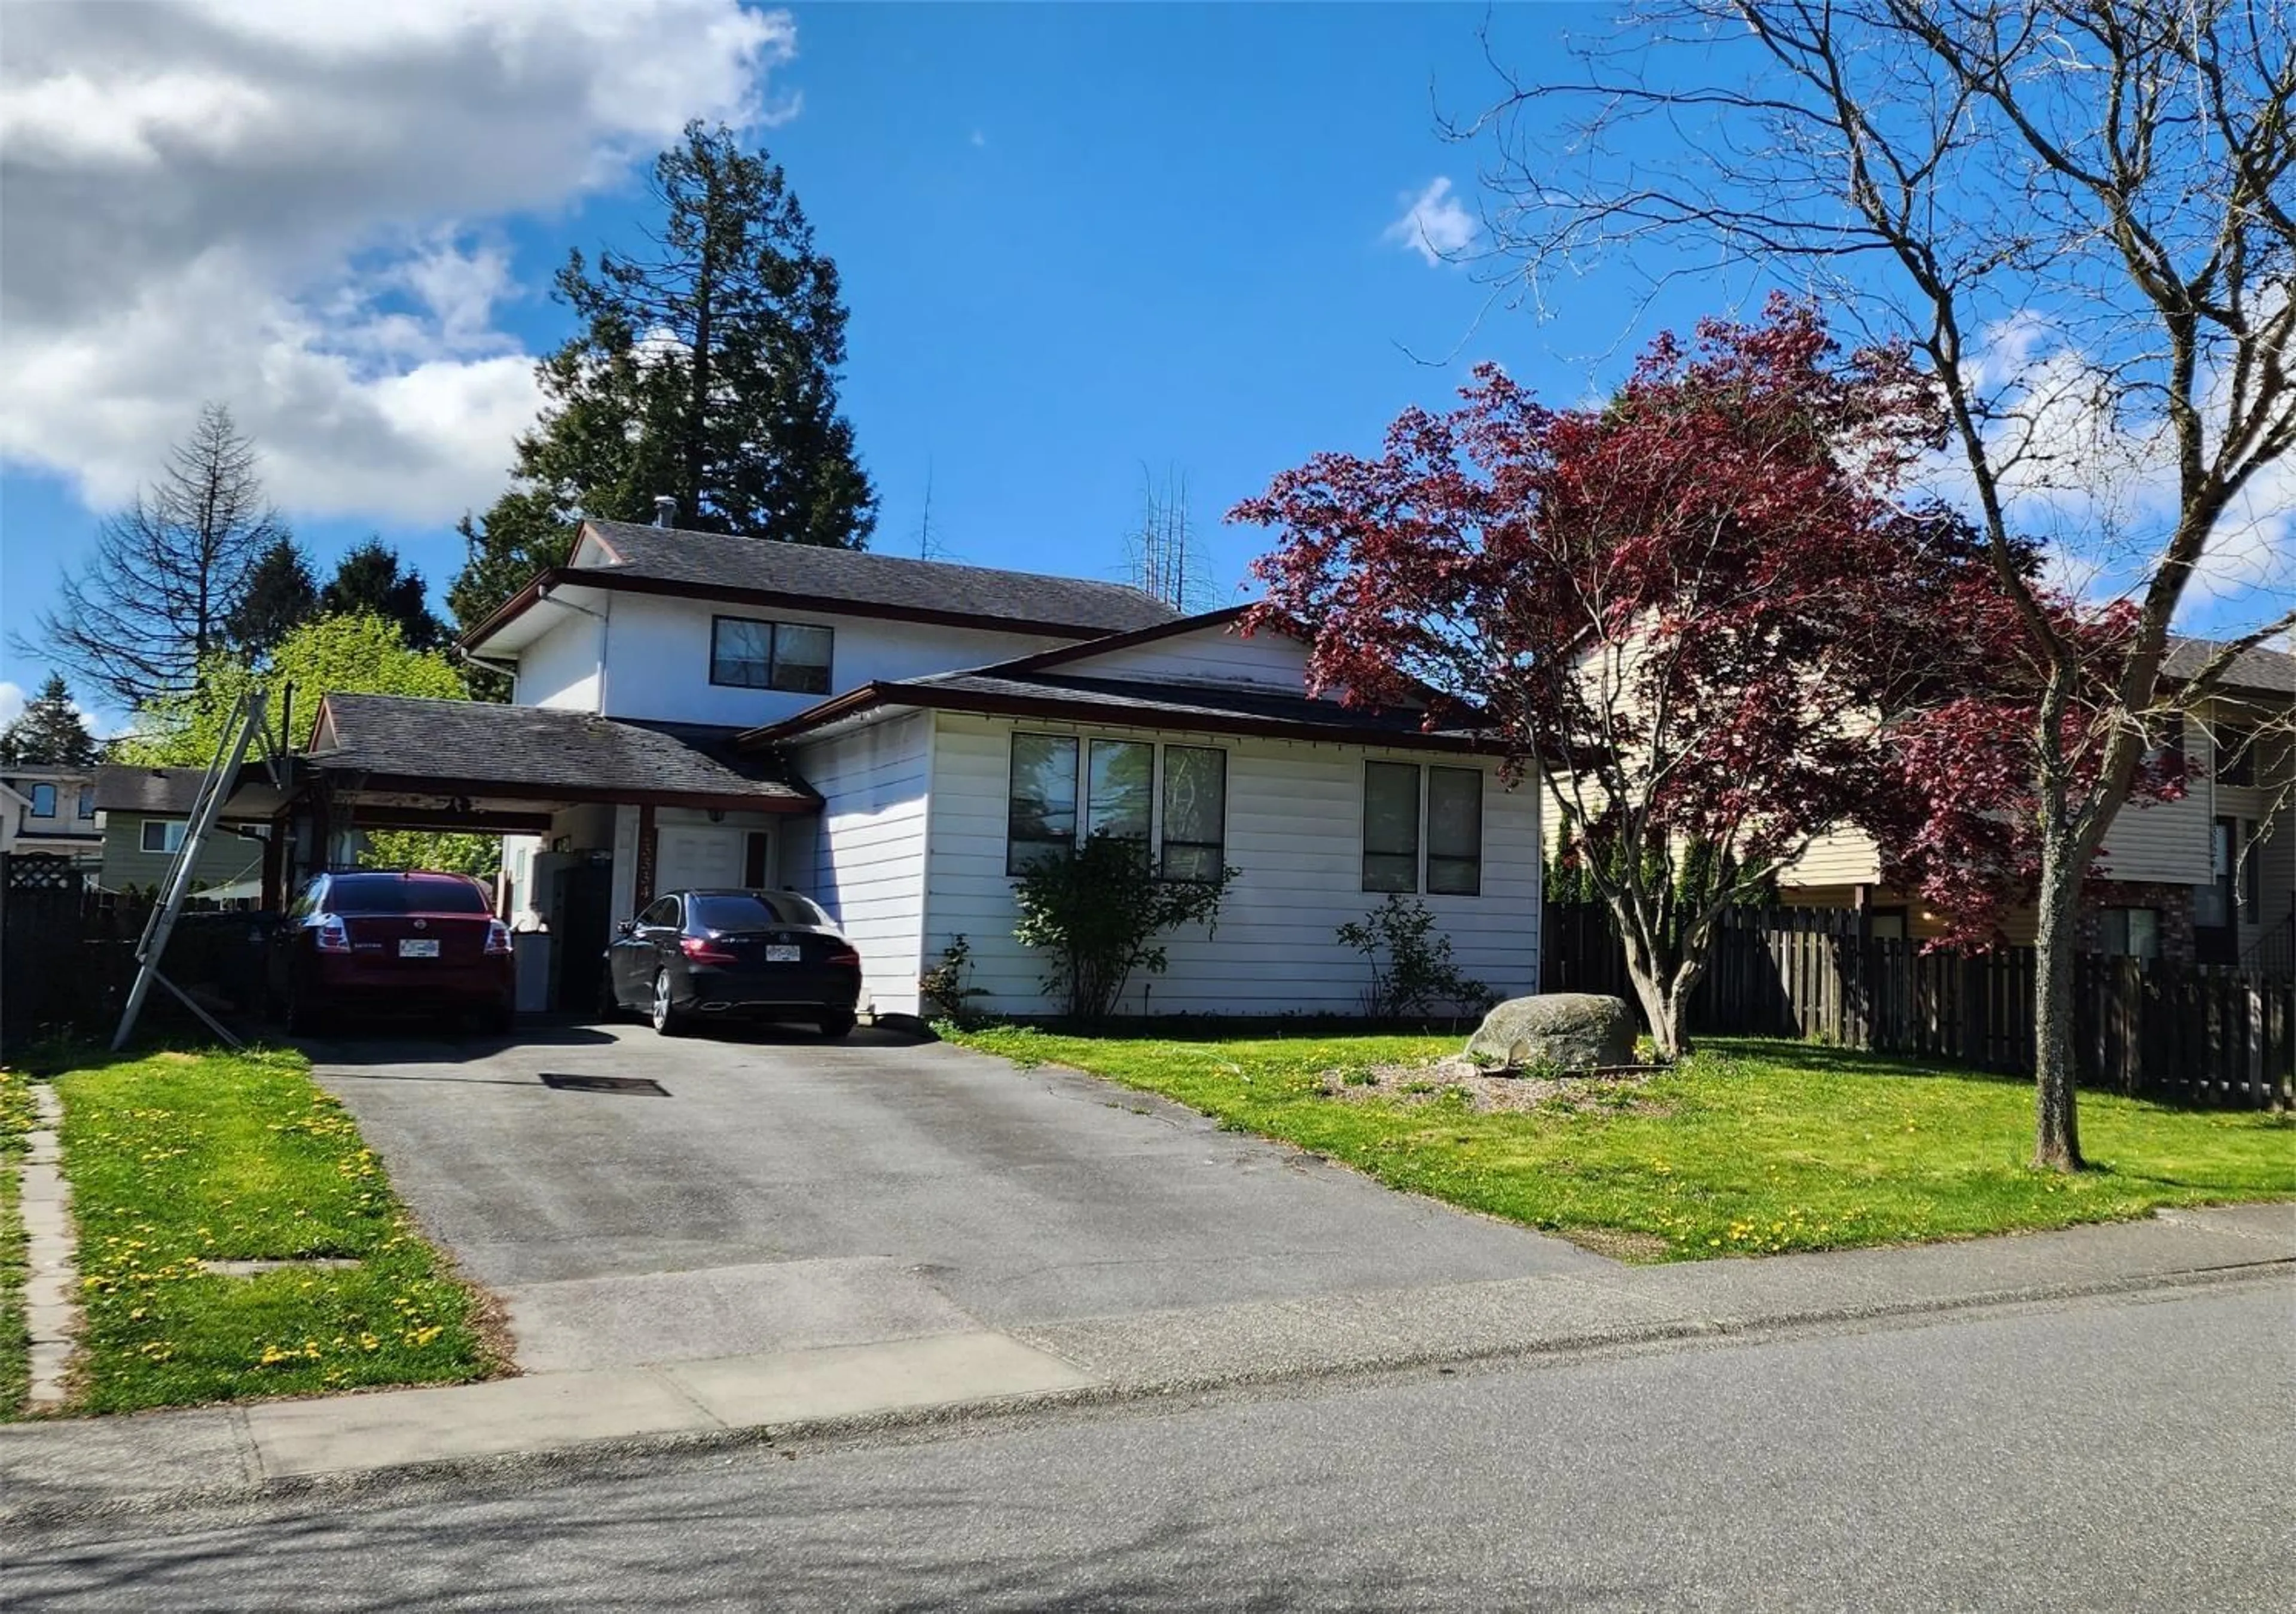 Frontside or backside of a home for 13334 79 AVENUE, Surrey British Columbia V3W8H4